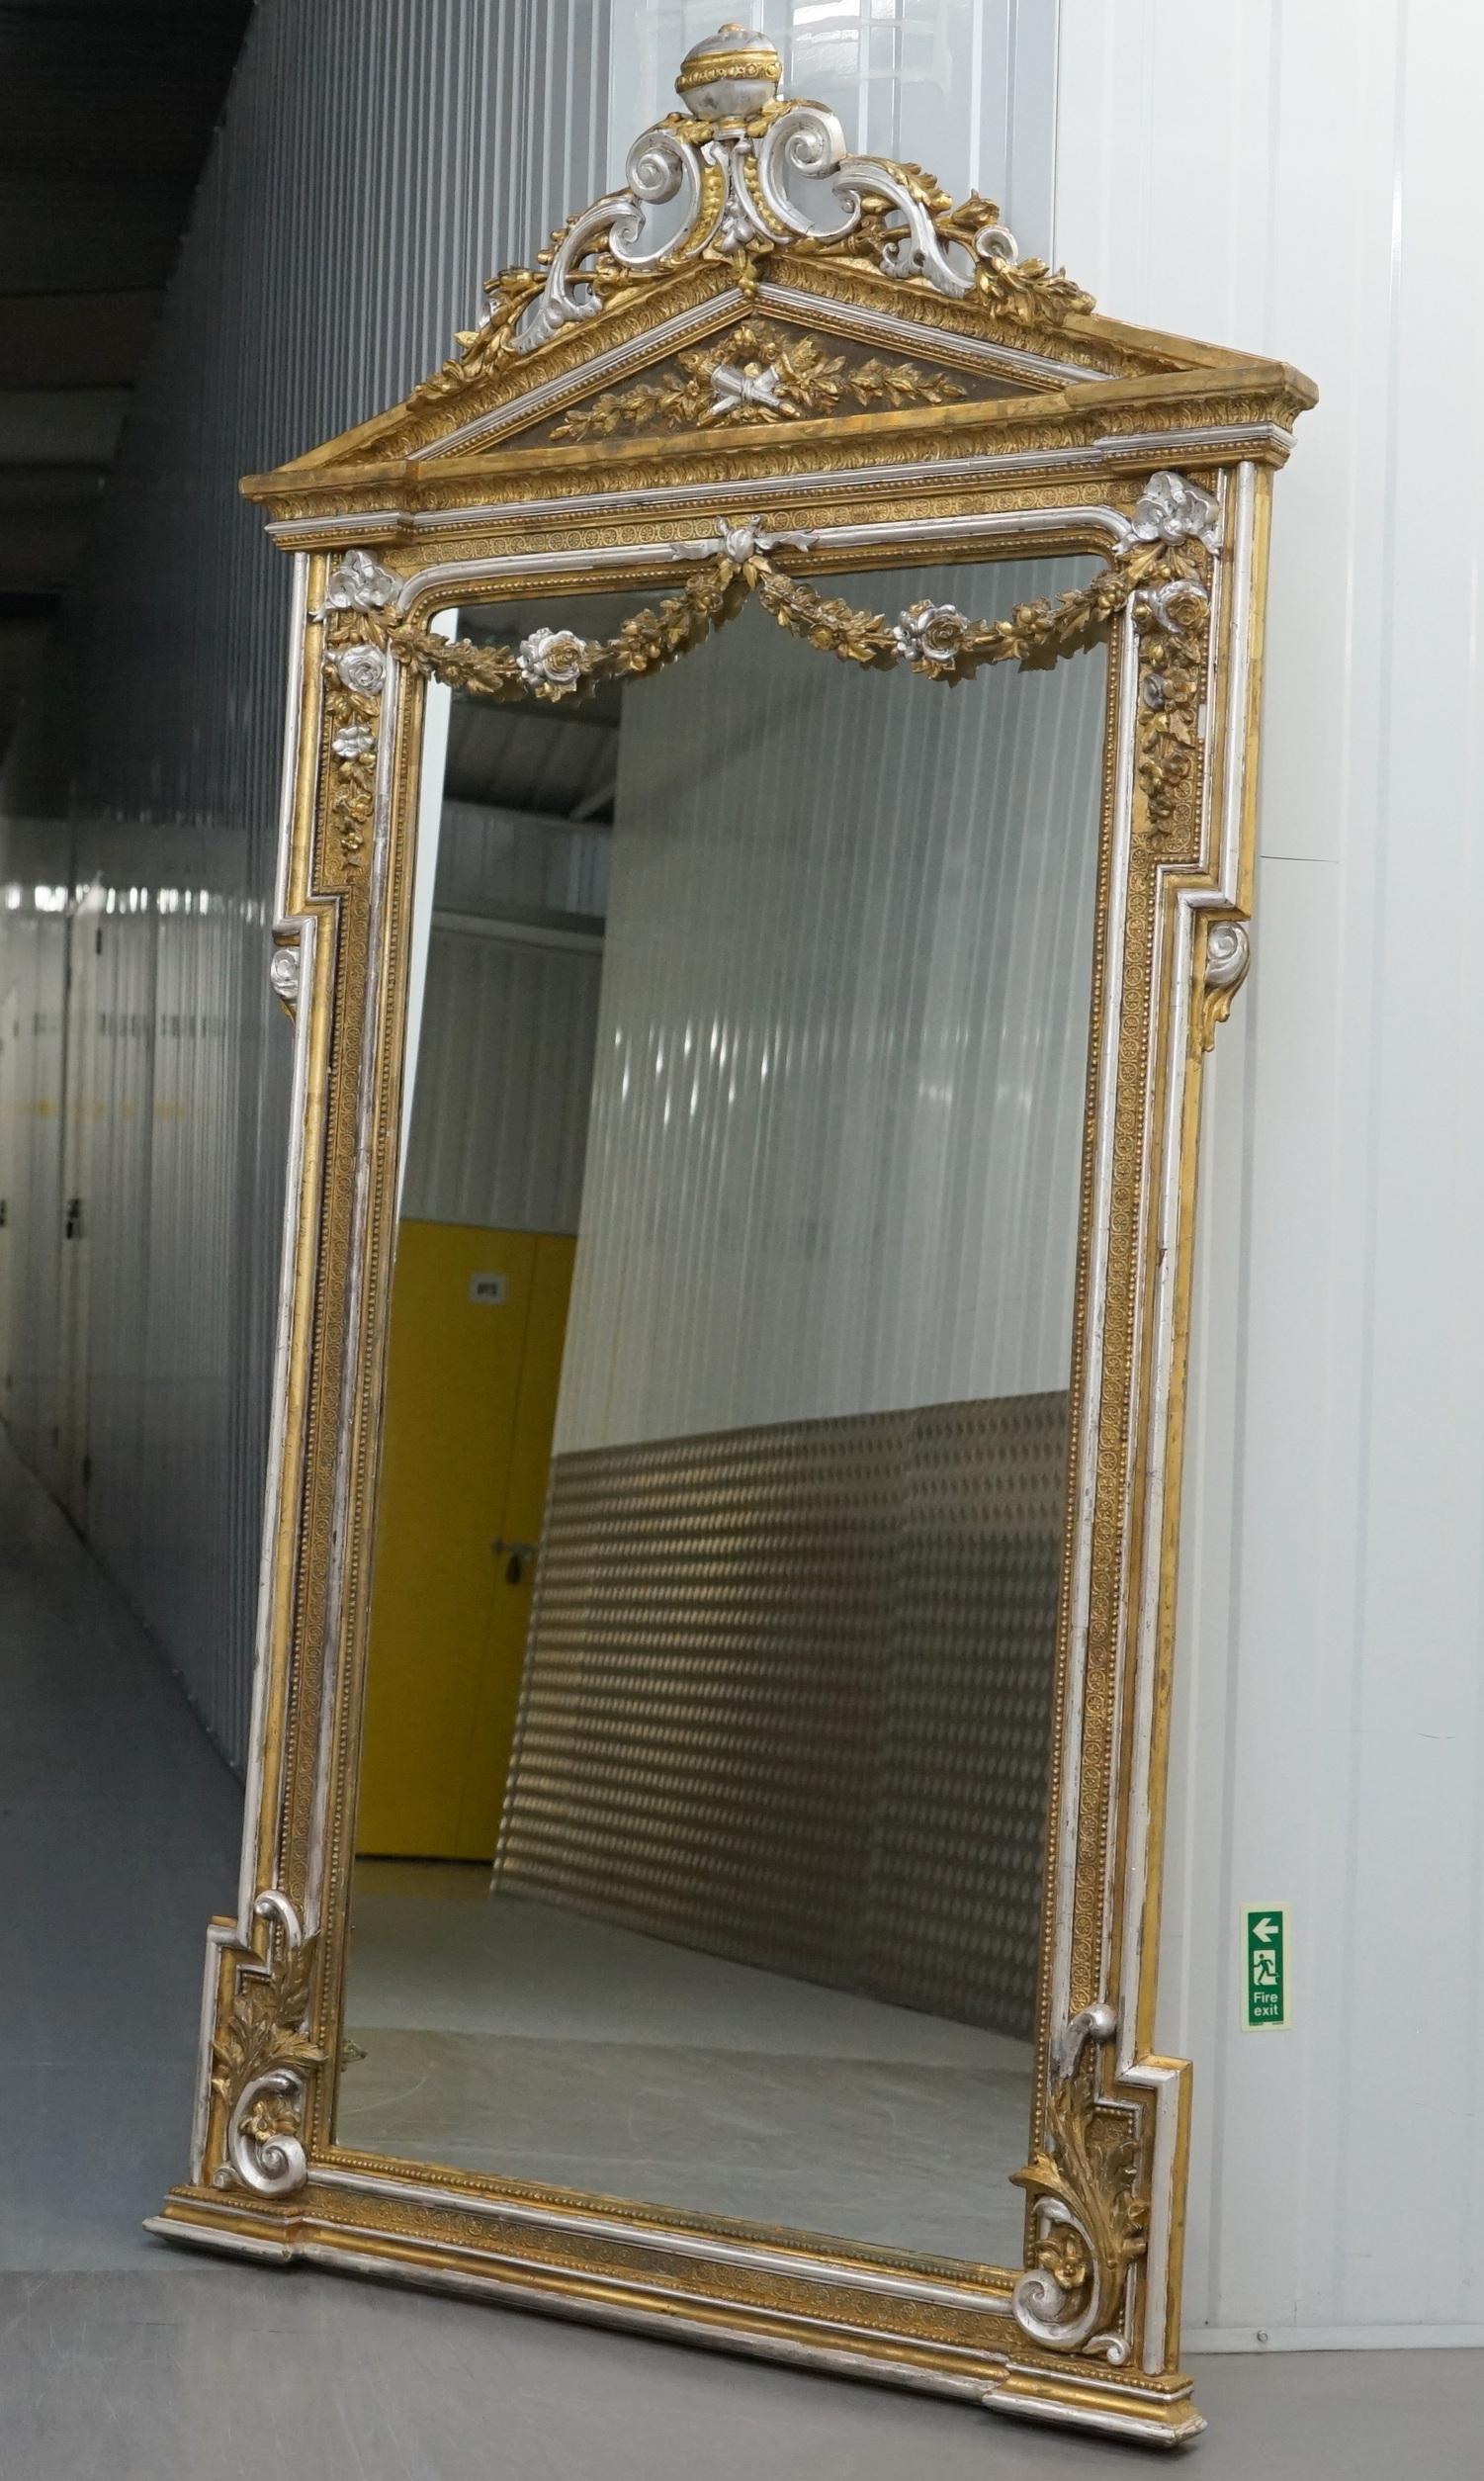 We are delighted to offer for sale this stunning Victorian hand carved wood with gold & silver leaf painted full-length Pier mirror

A very ornately decorated and carved piece, ideally wall mounted but can be free standing as well. The timber